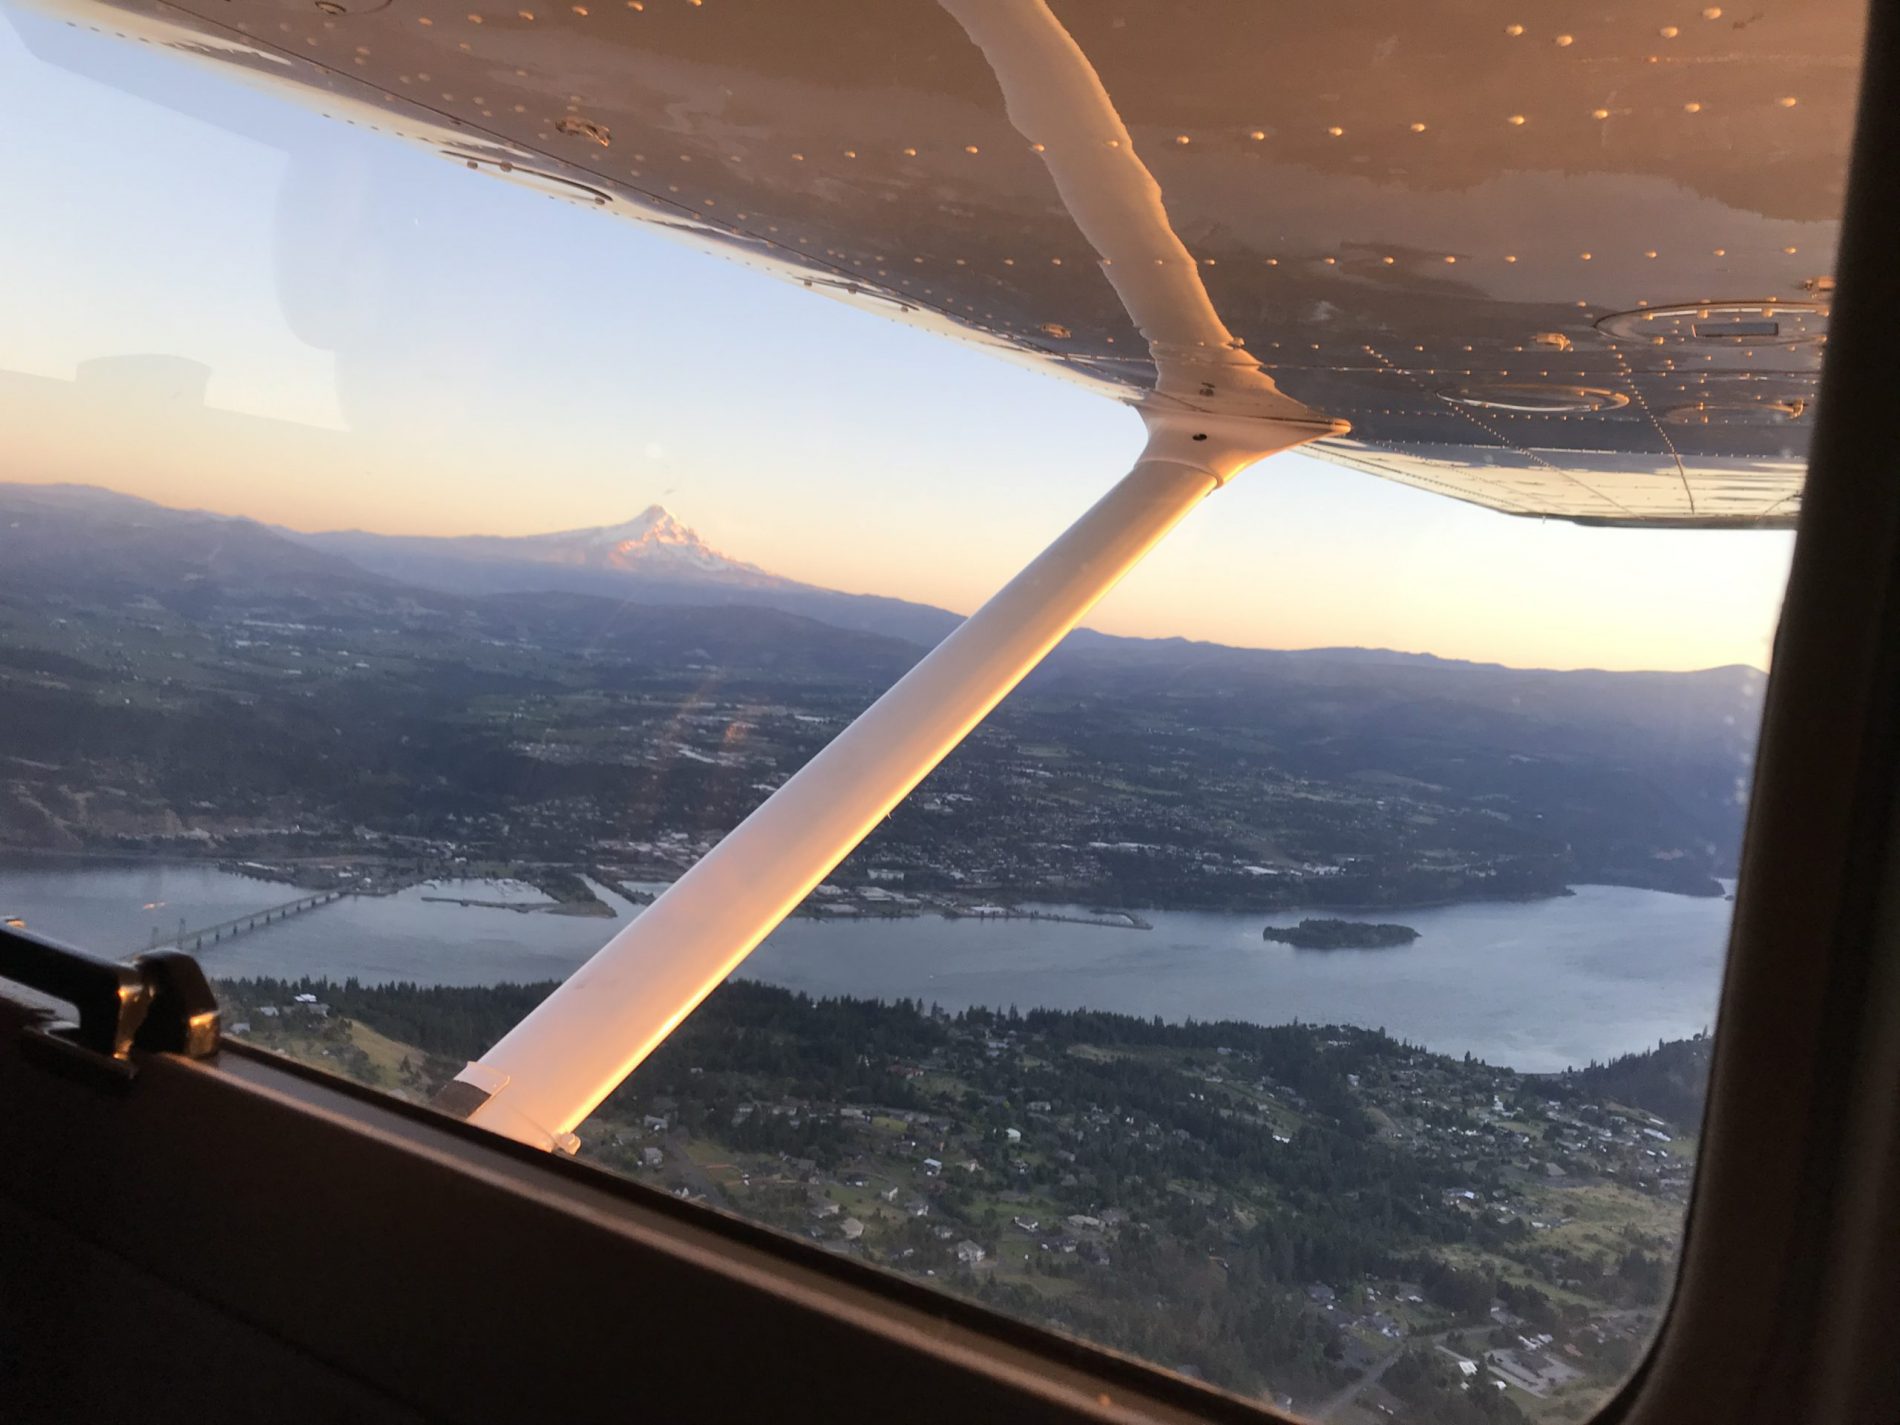 Arial views from a plane flying adjacent to the Columbia River